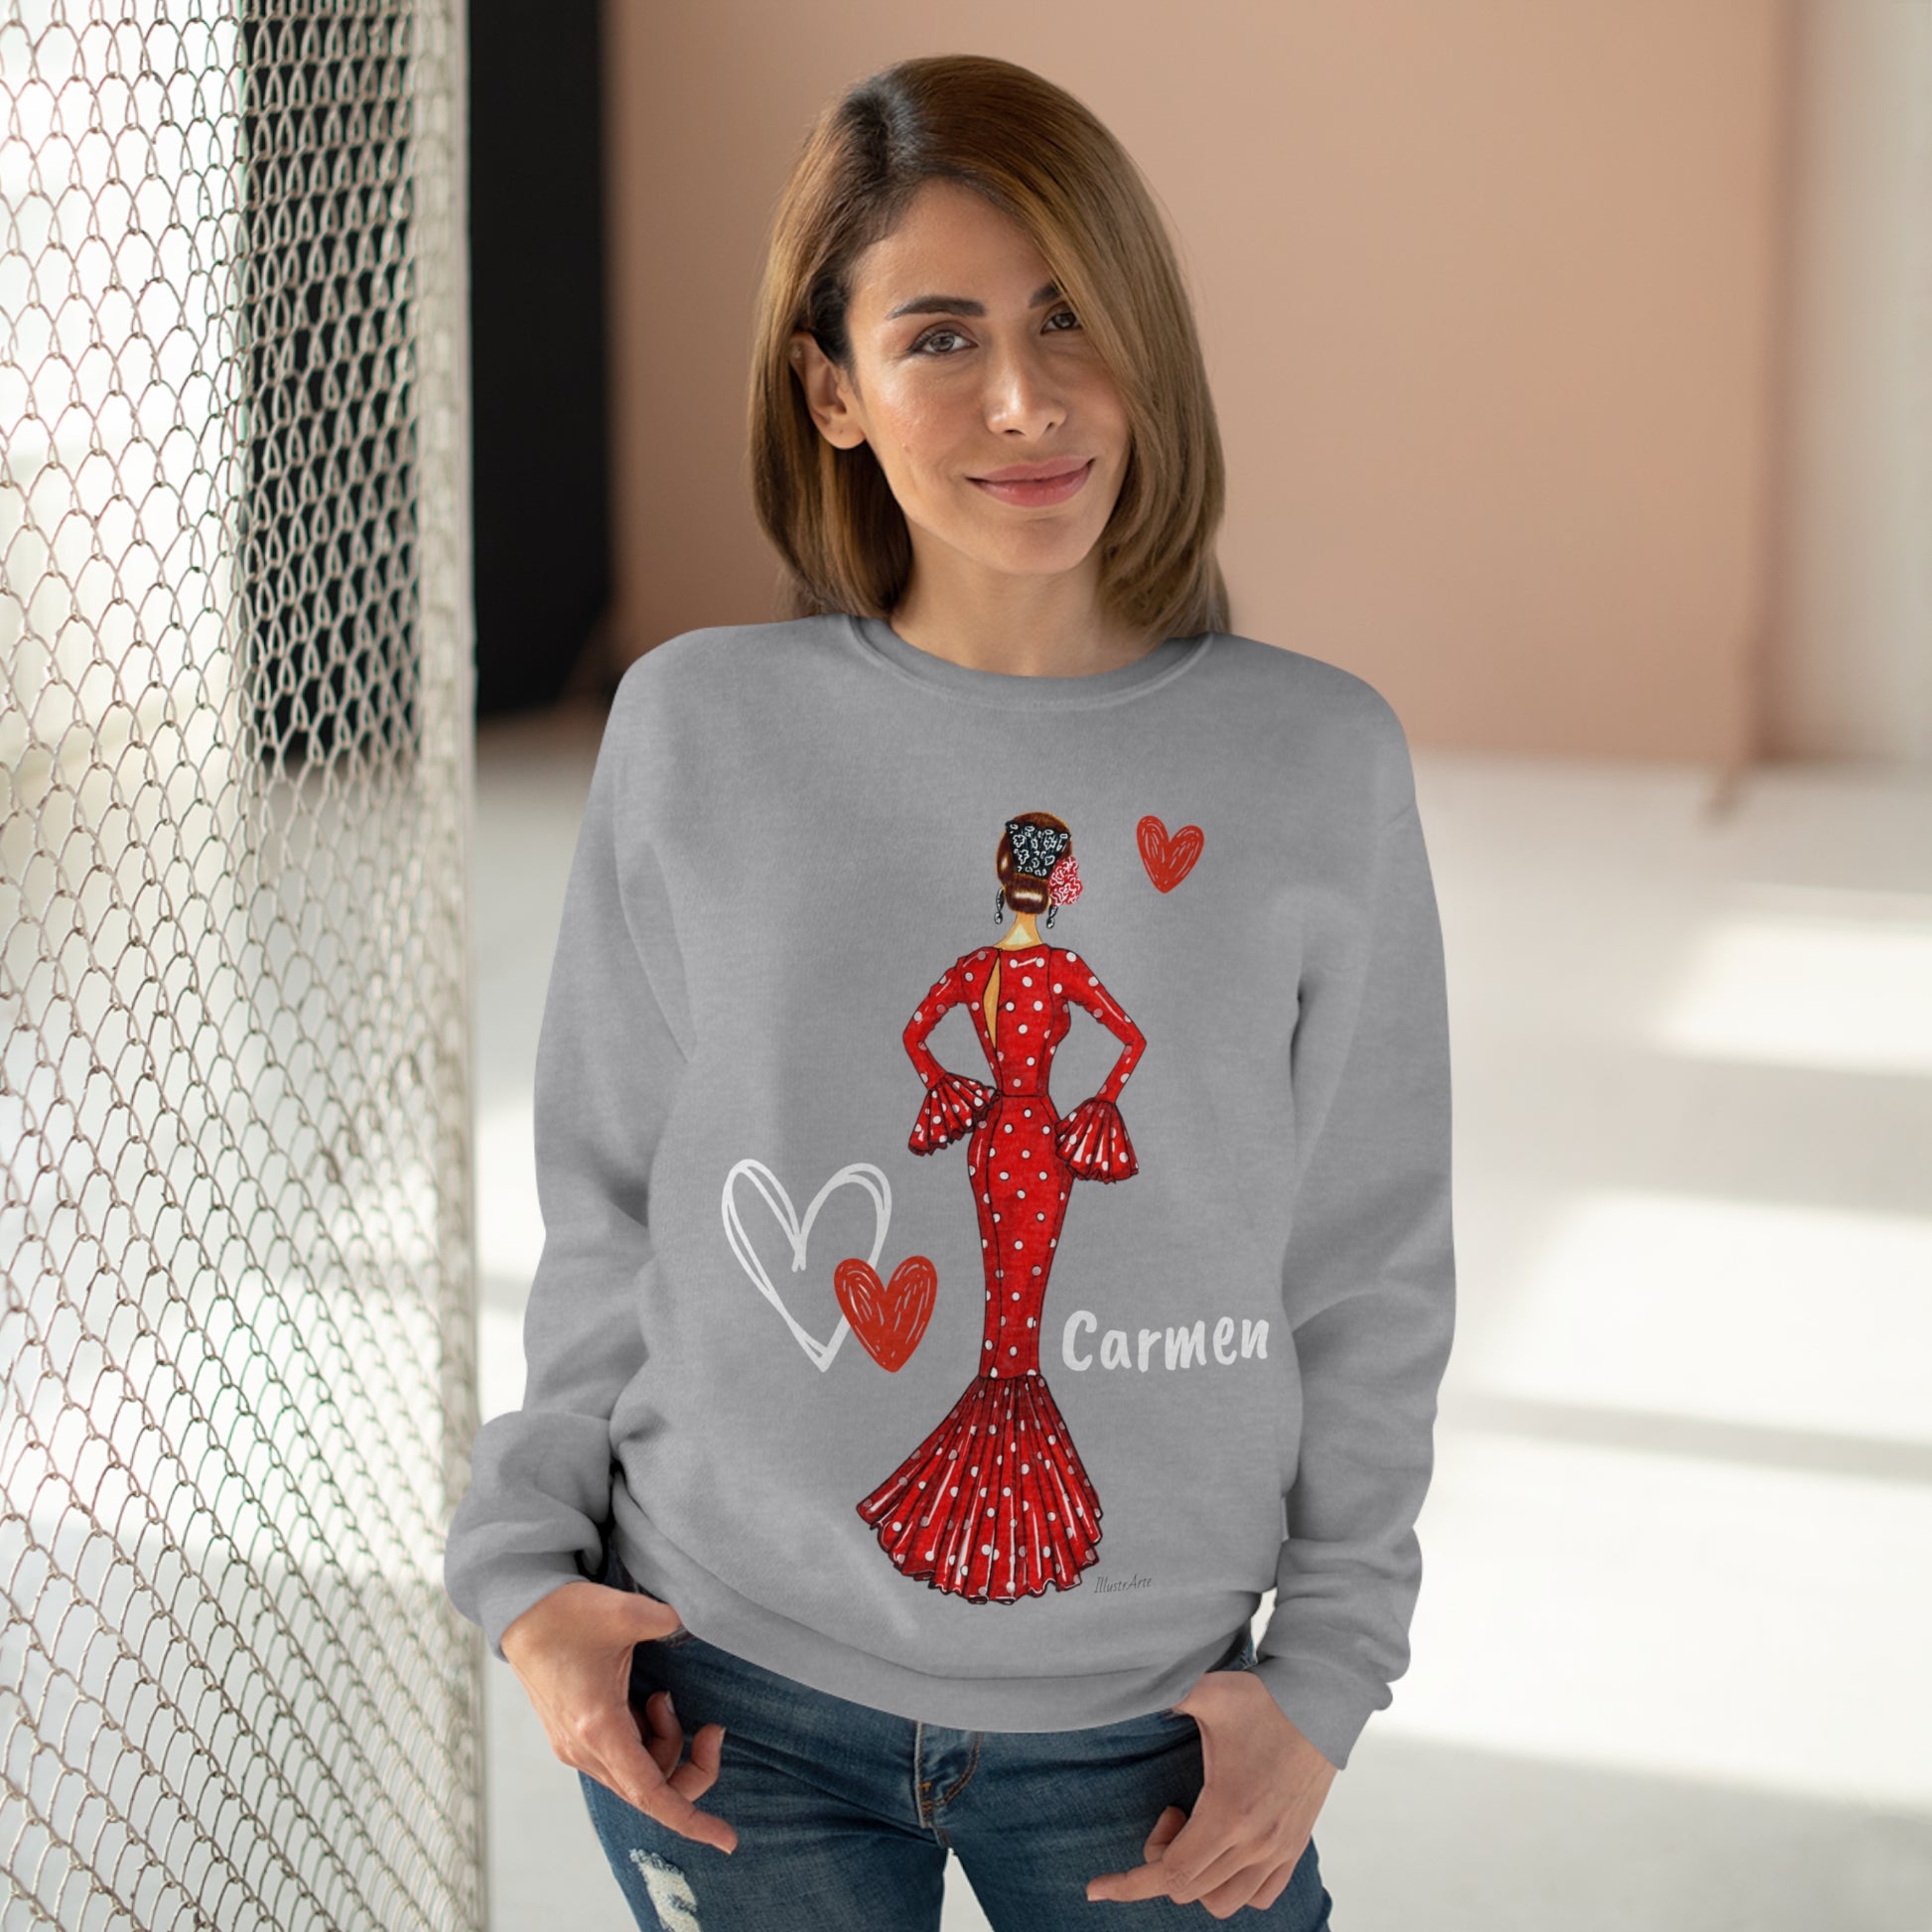 a woman wearing a sweater with a picture of a woman in a red dress